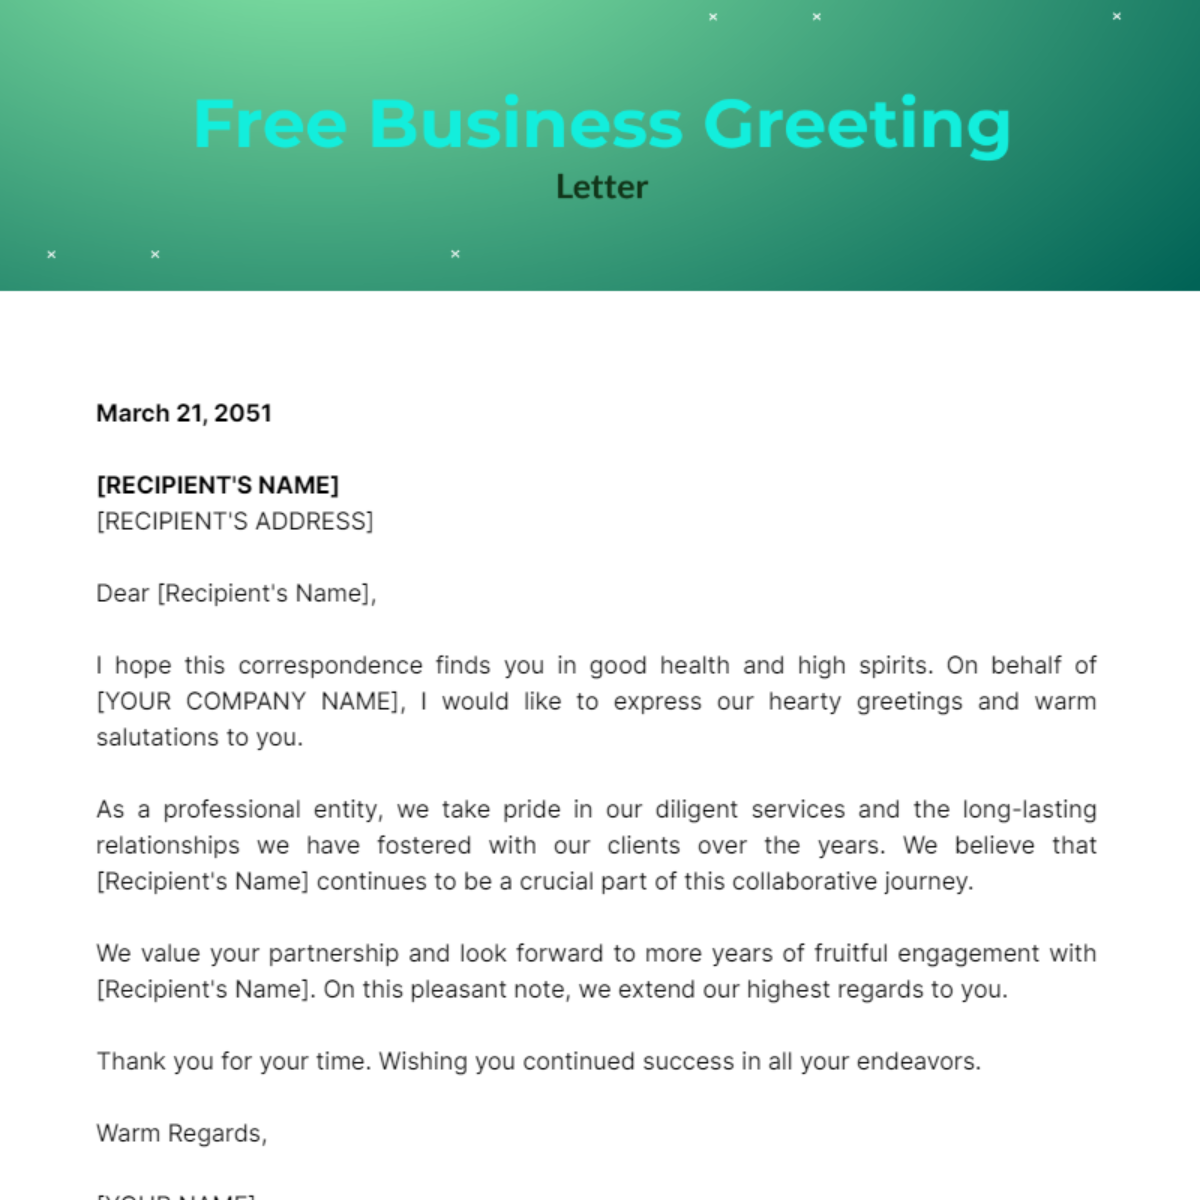 Business Greeting Letter Template